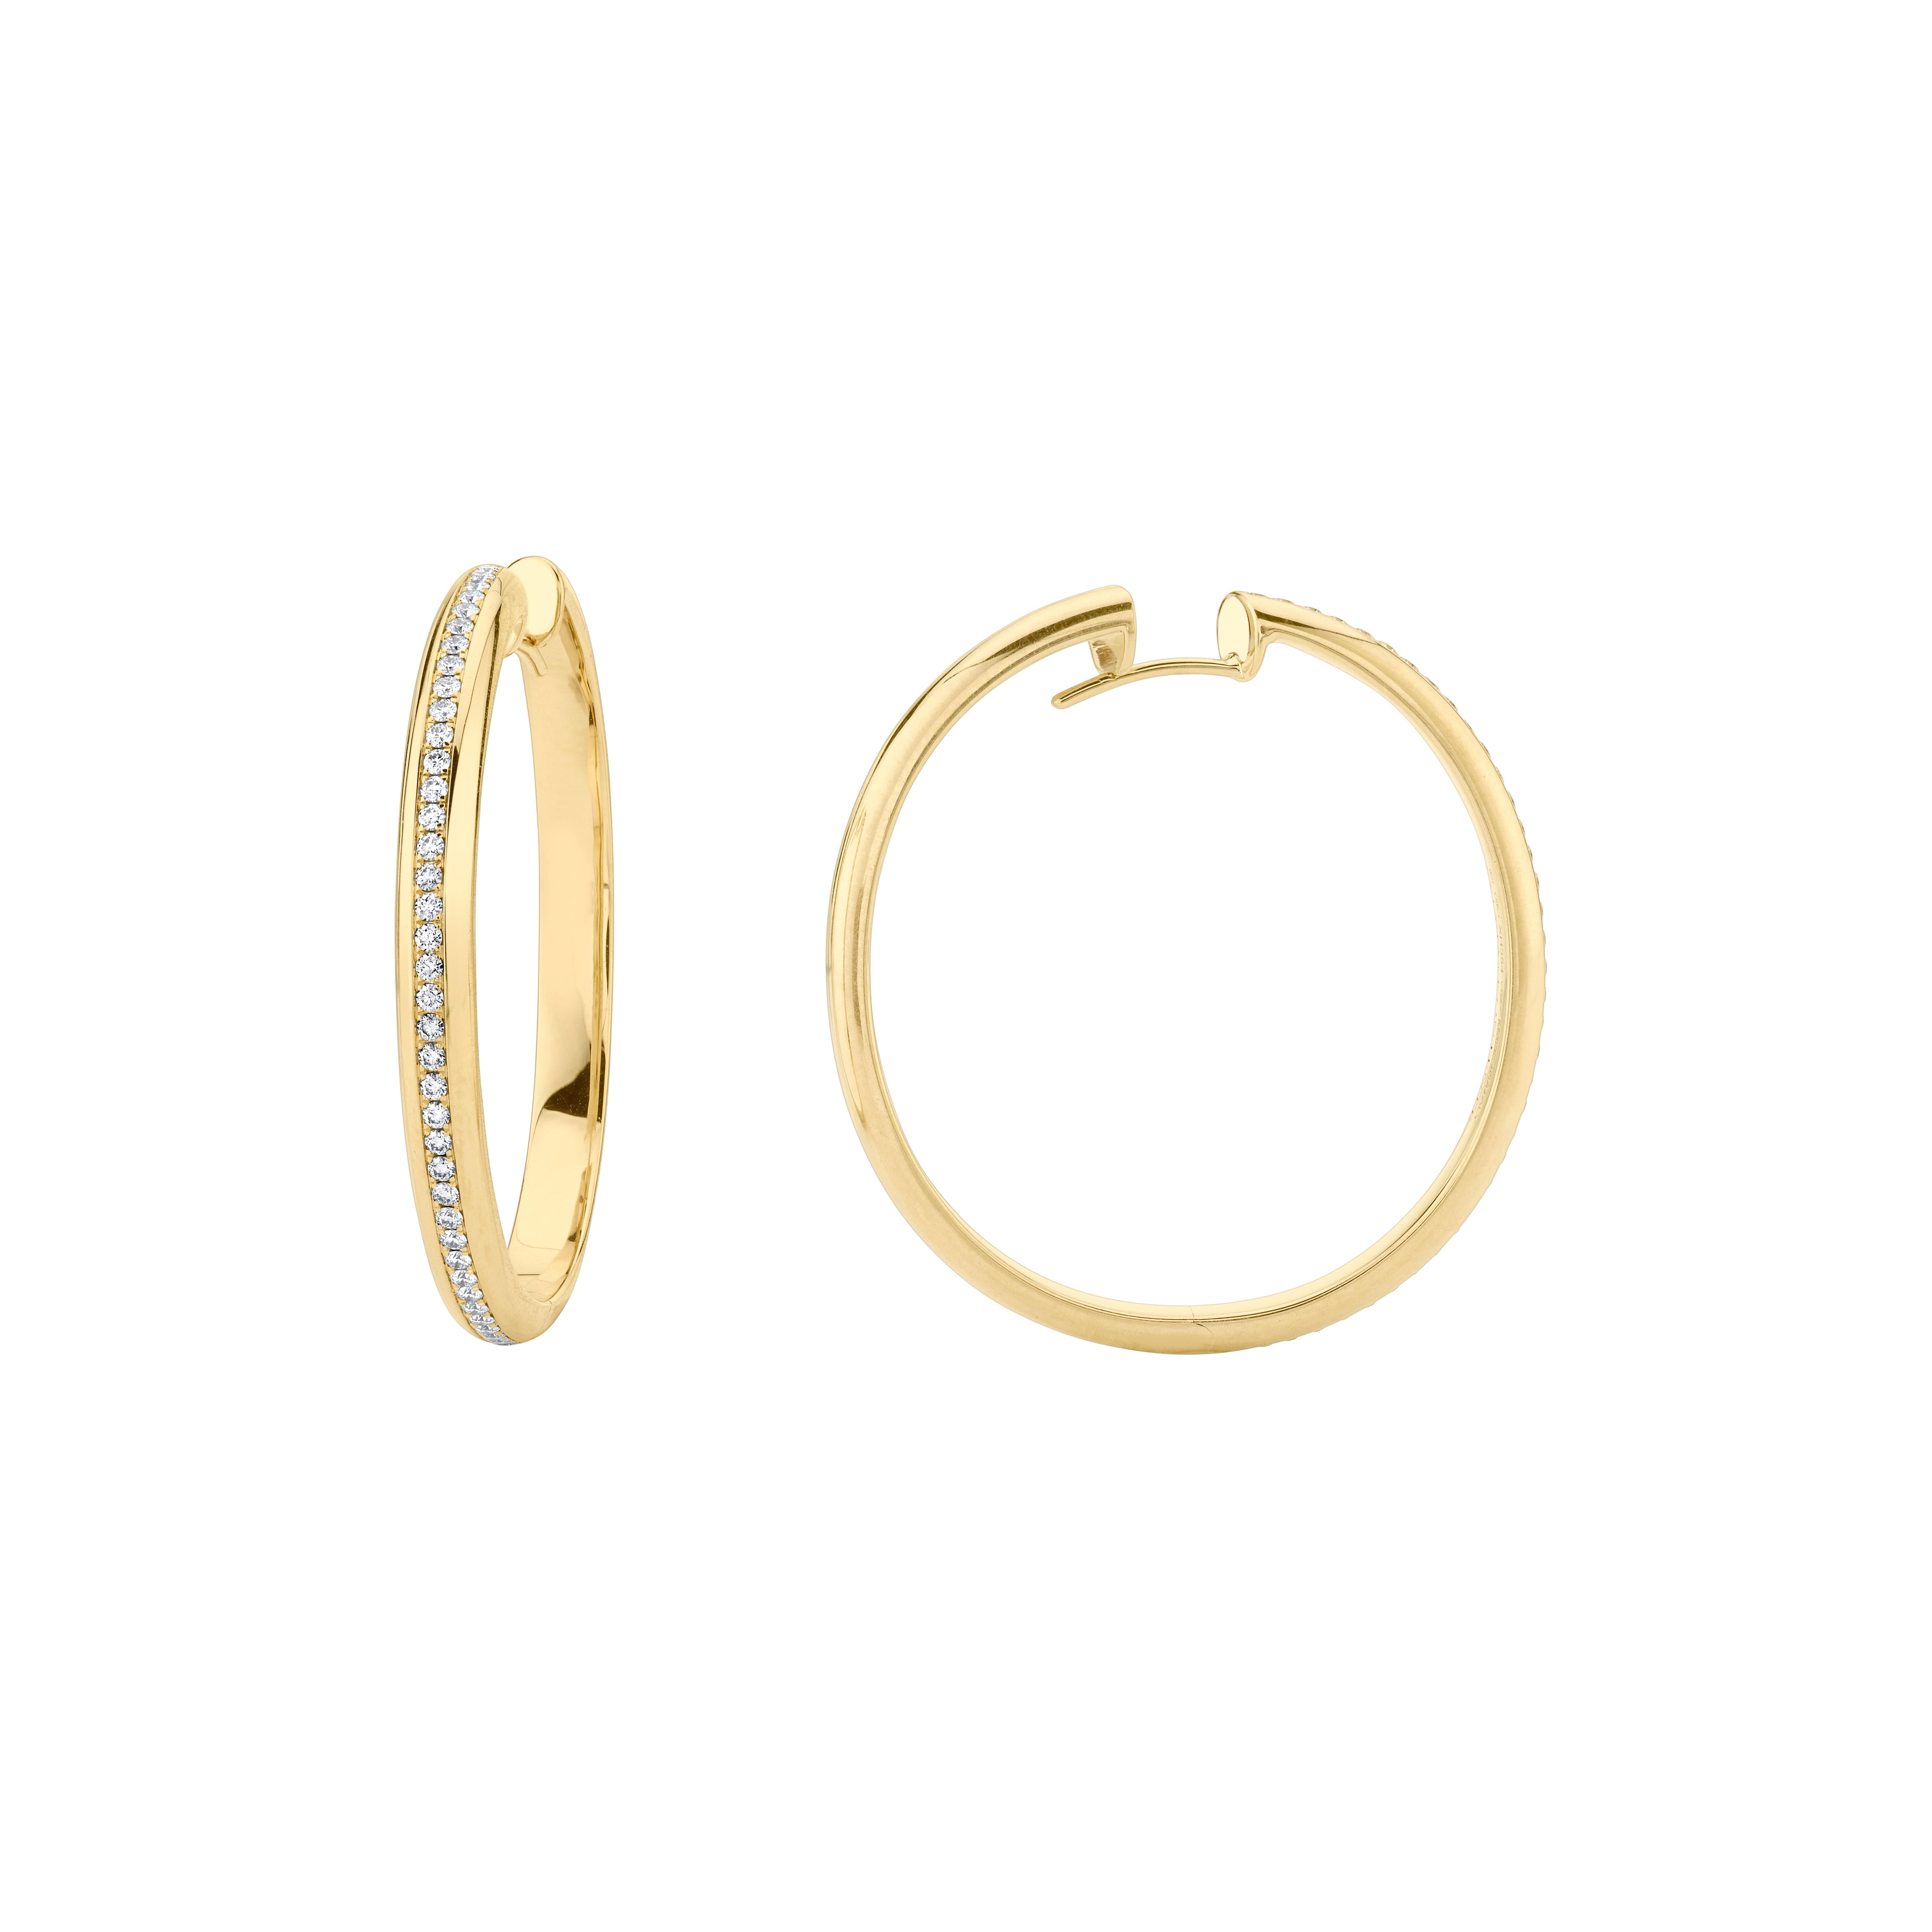 Style #: XH354P.
SYLVIA KONTENTE  18K Yellow gold diamond hoop earrings with polished finish.
Precision-cut, round brilliant diamonds.
Diamond total weight: 0.71ct tw.
Diamond color/clarity: DEF/VVS VS.
Polished finish.
High-end construction.
Size: